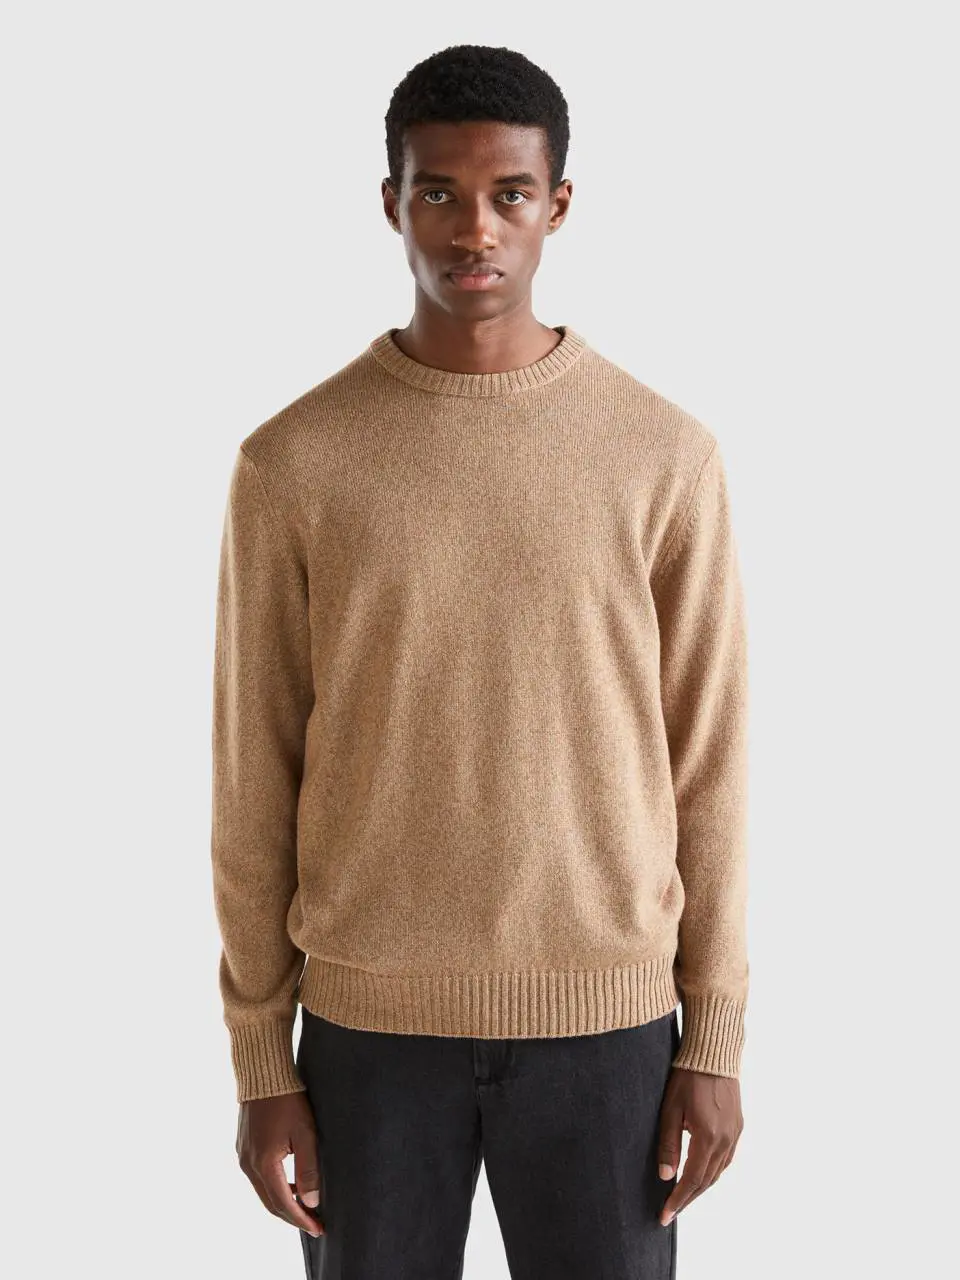 Benetton crew neck sweater in cashmere and wool blend. 1